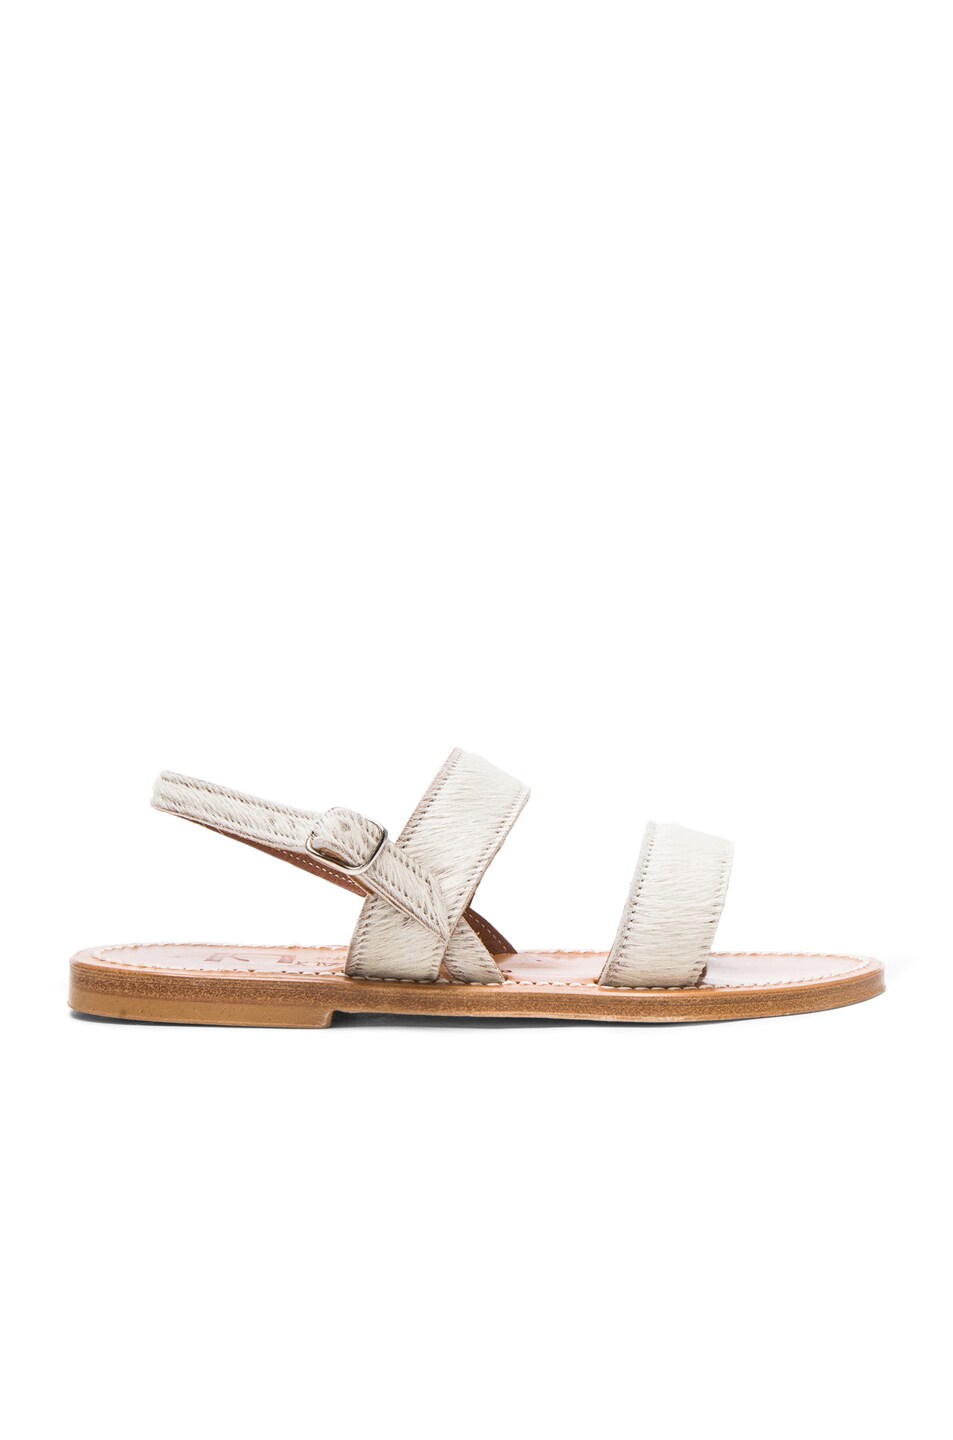 Image 1 of K Jacques Barigoule Sandals in Pony Hair Blanc